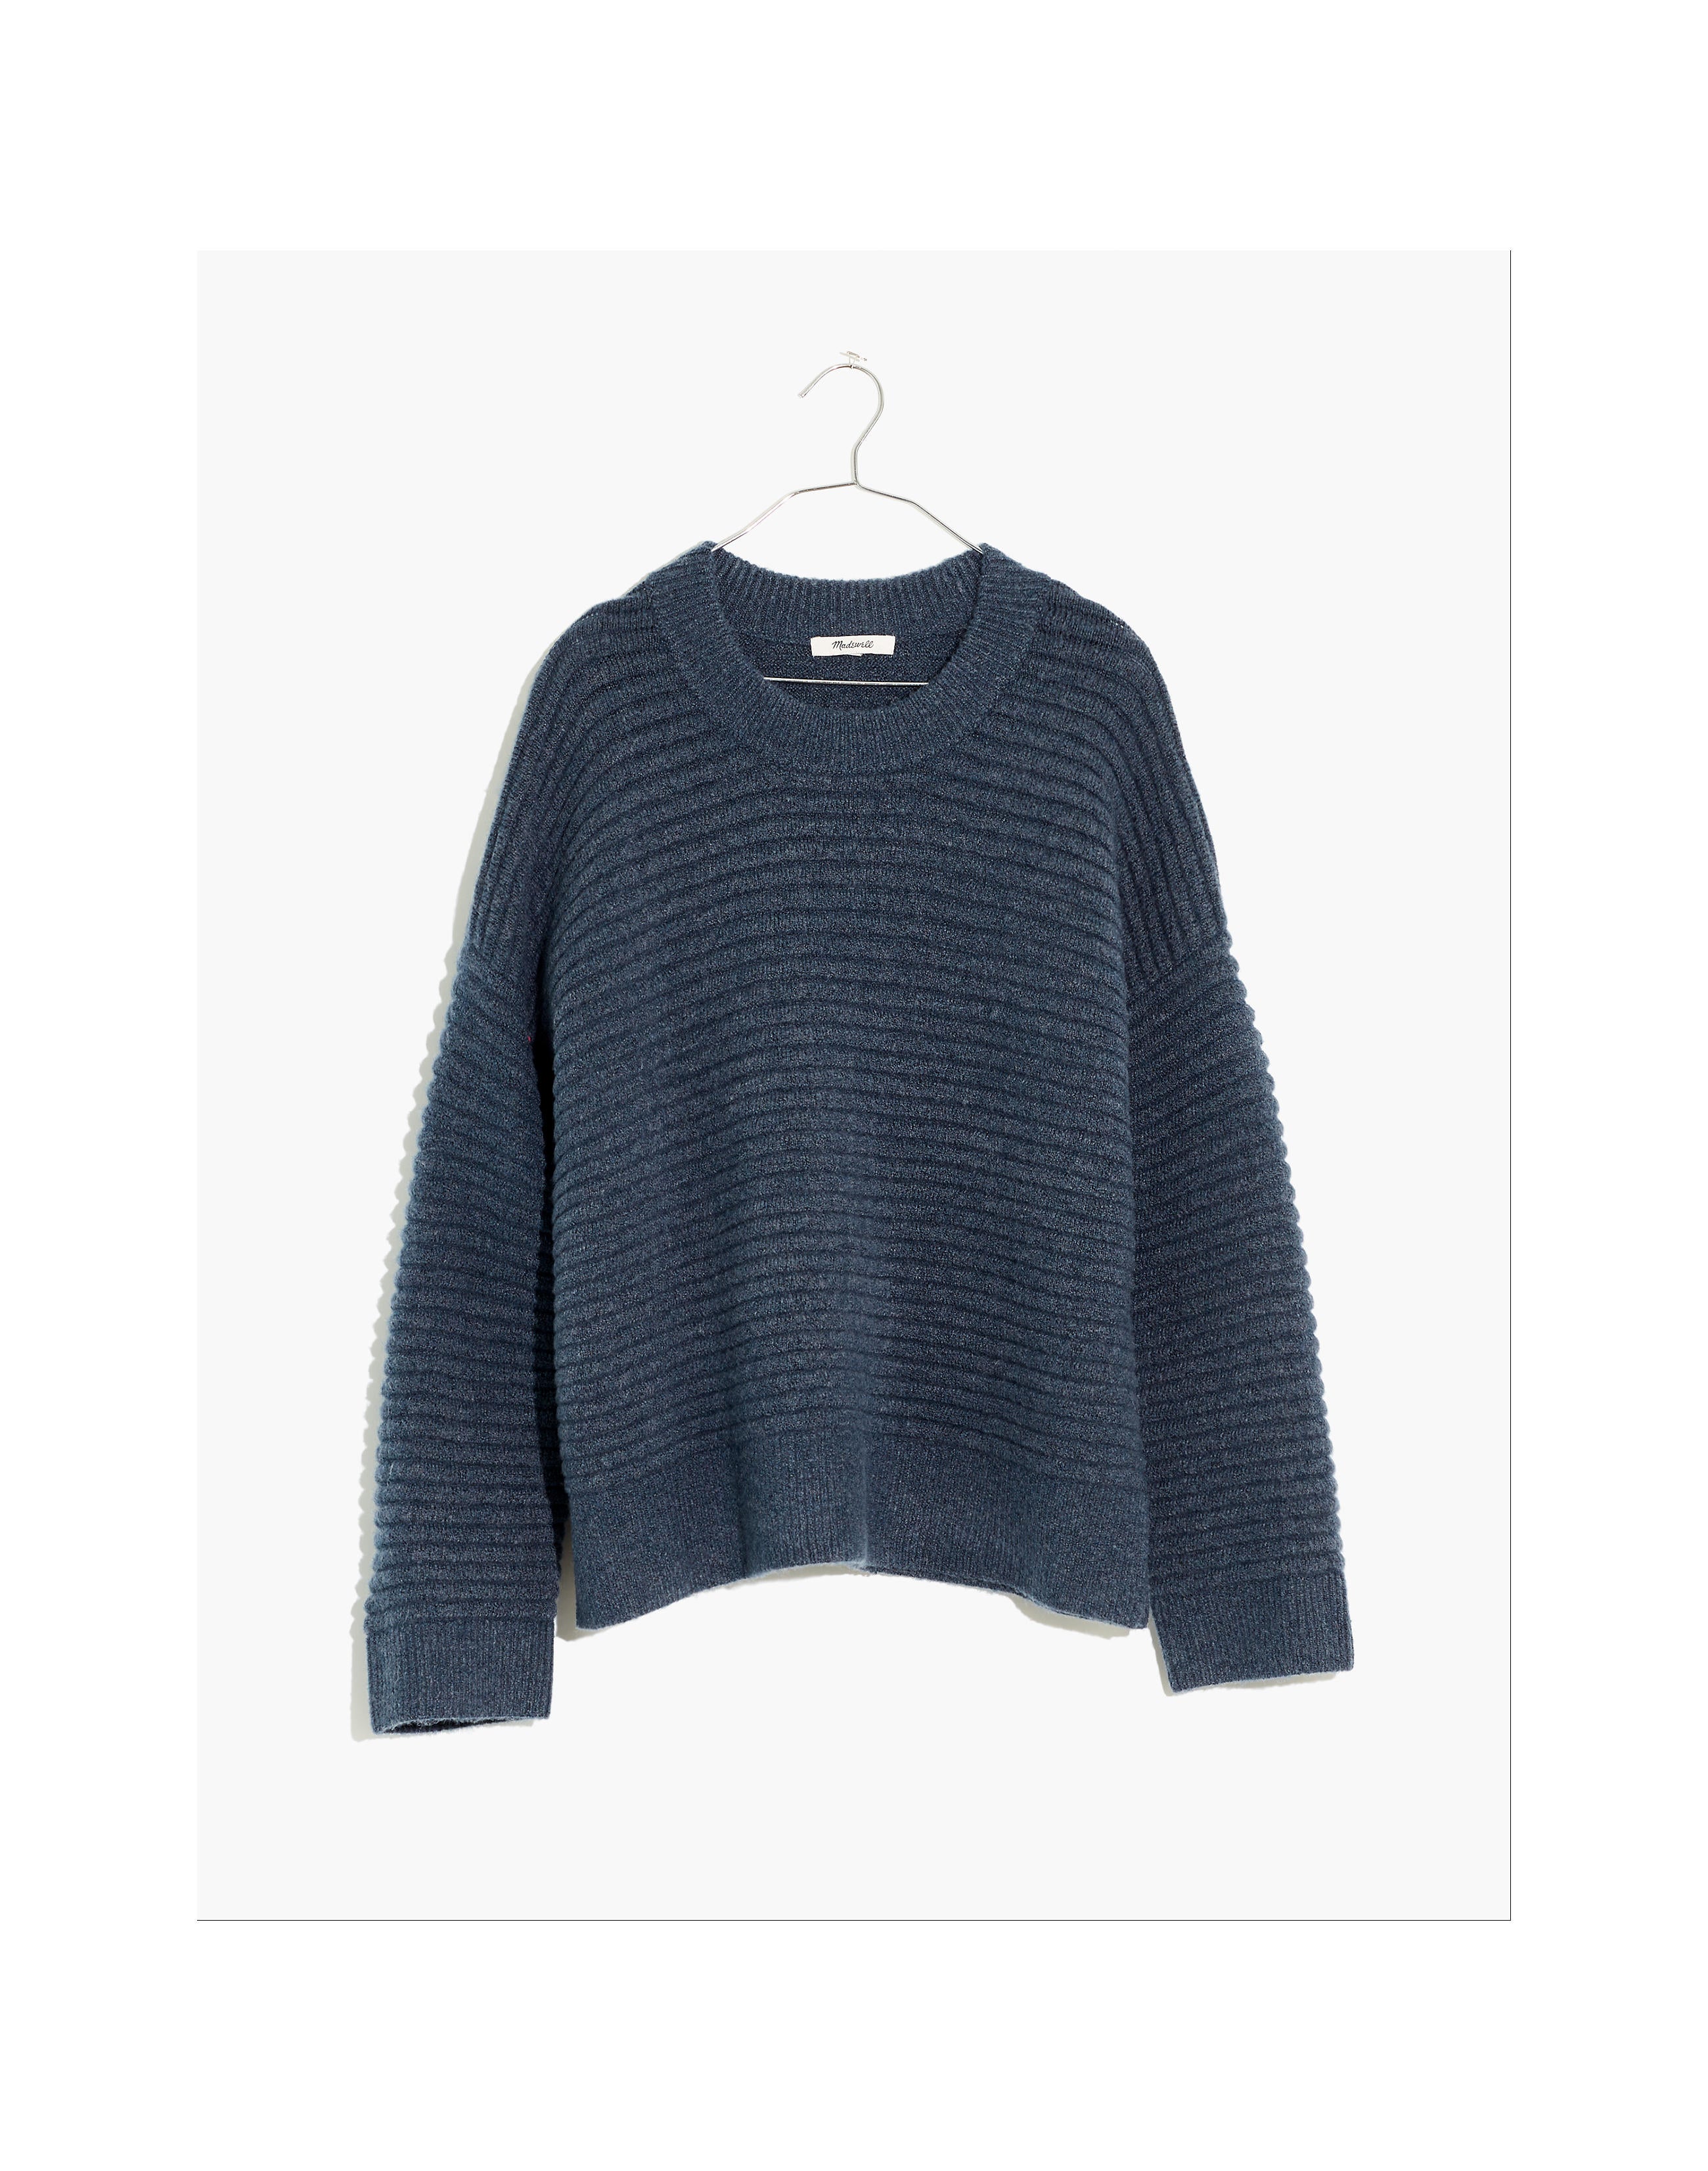 Madewell + Elsmere Pullover Sweater